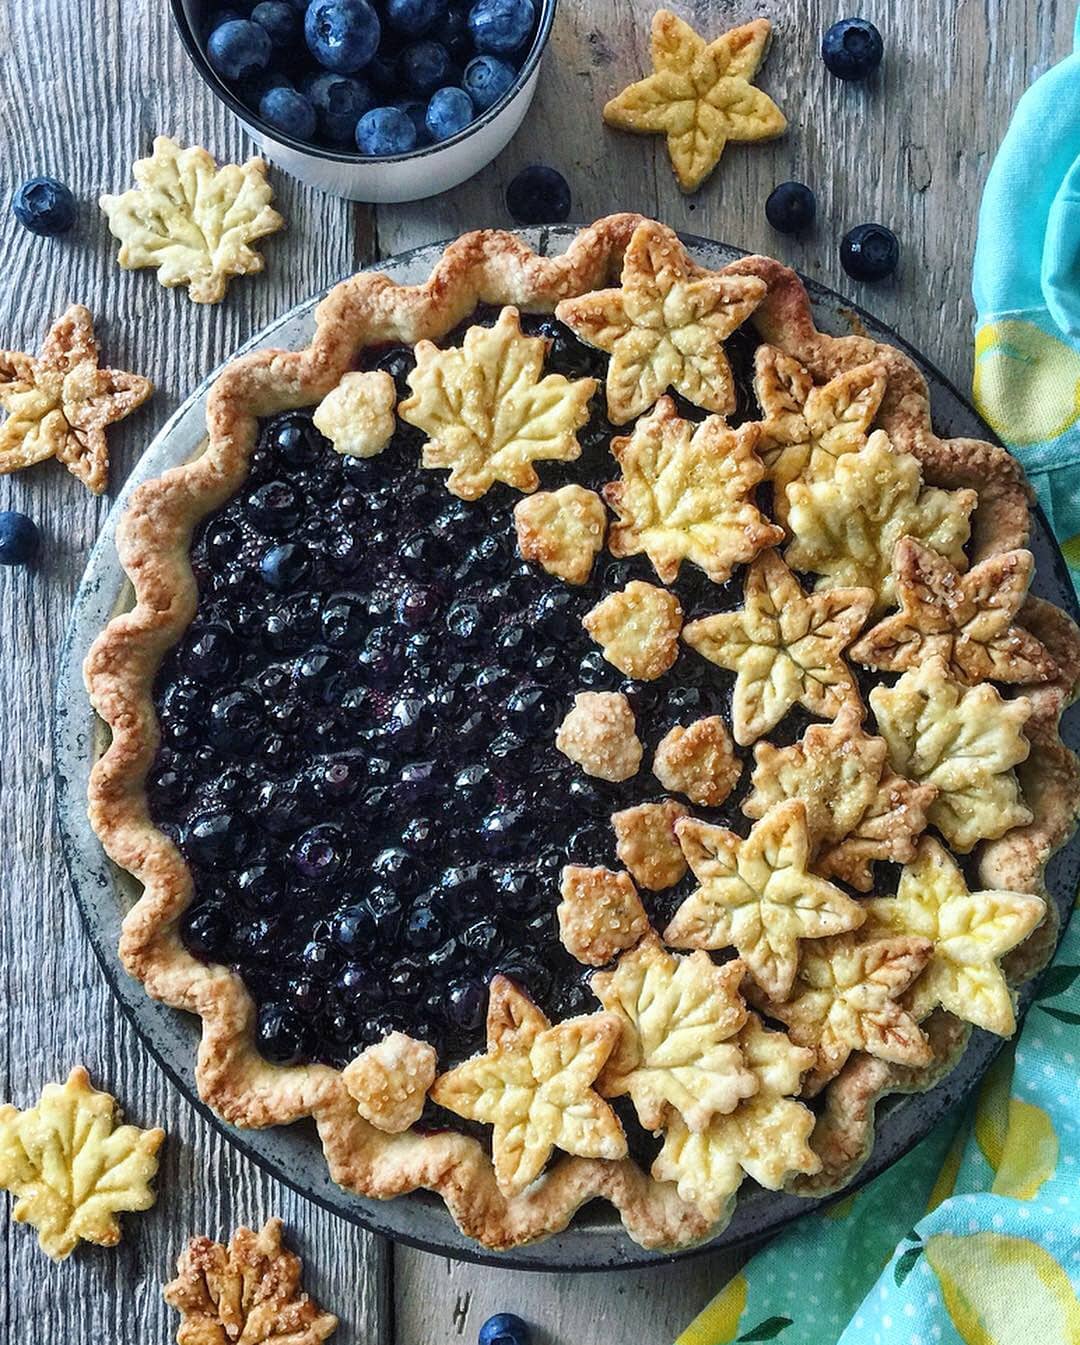 Fresh Blueberry Pie with a Lavender Crust